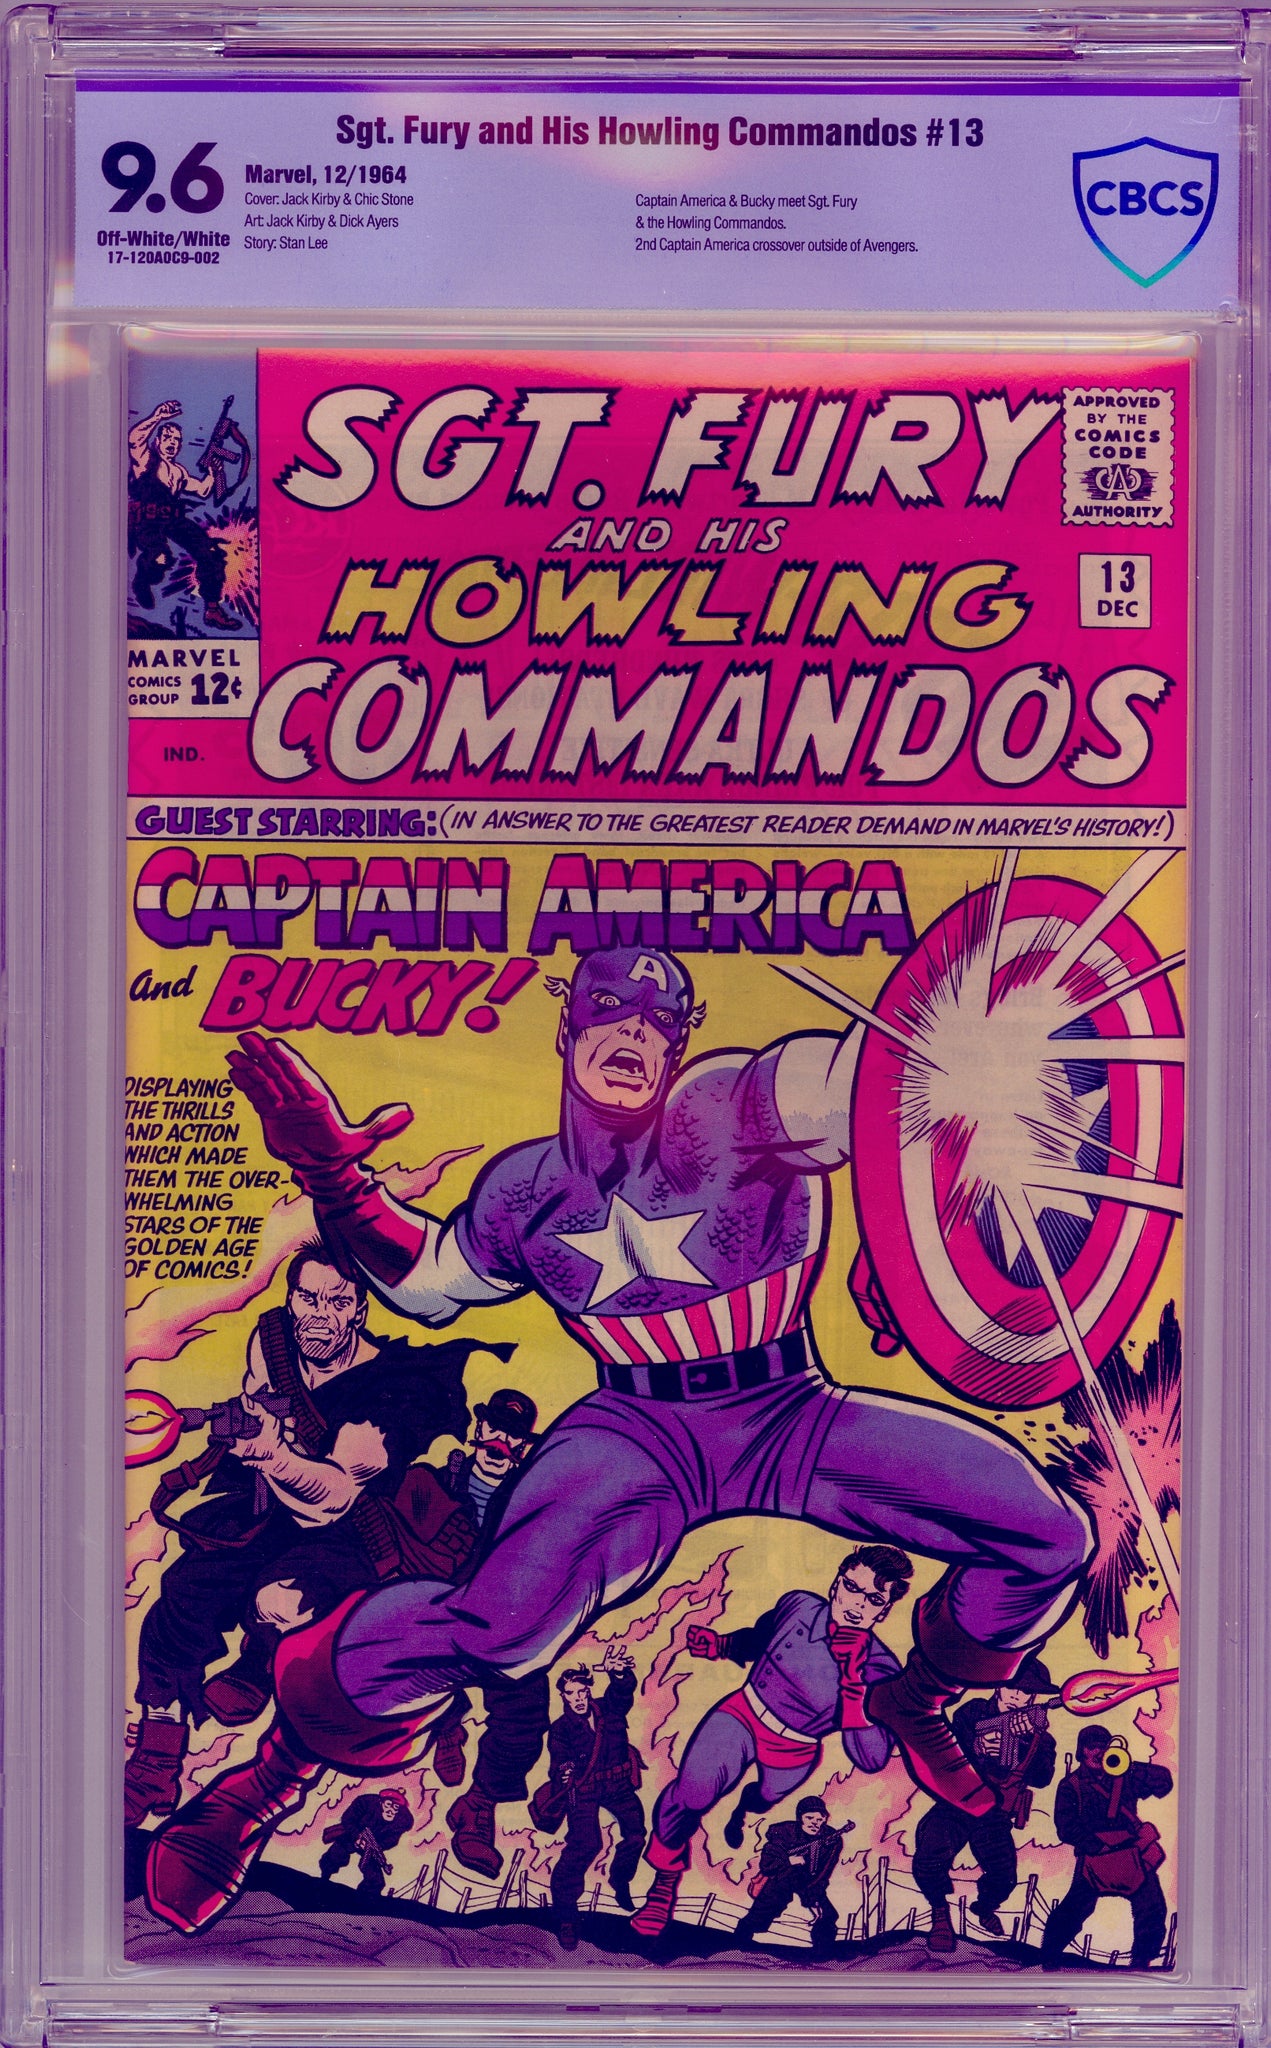 Sgt. Fury and His Howling Commandos #13 (1964) Captain America